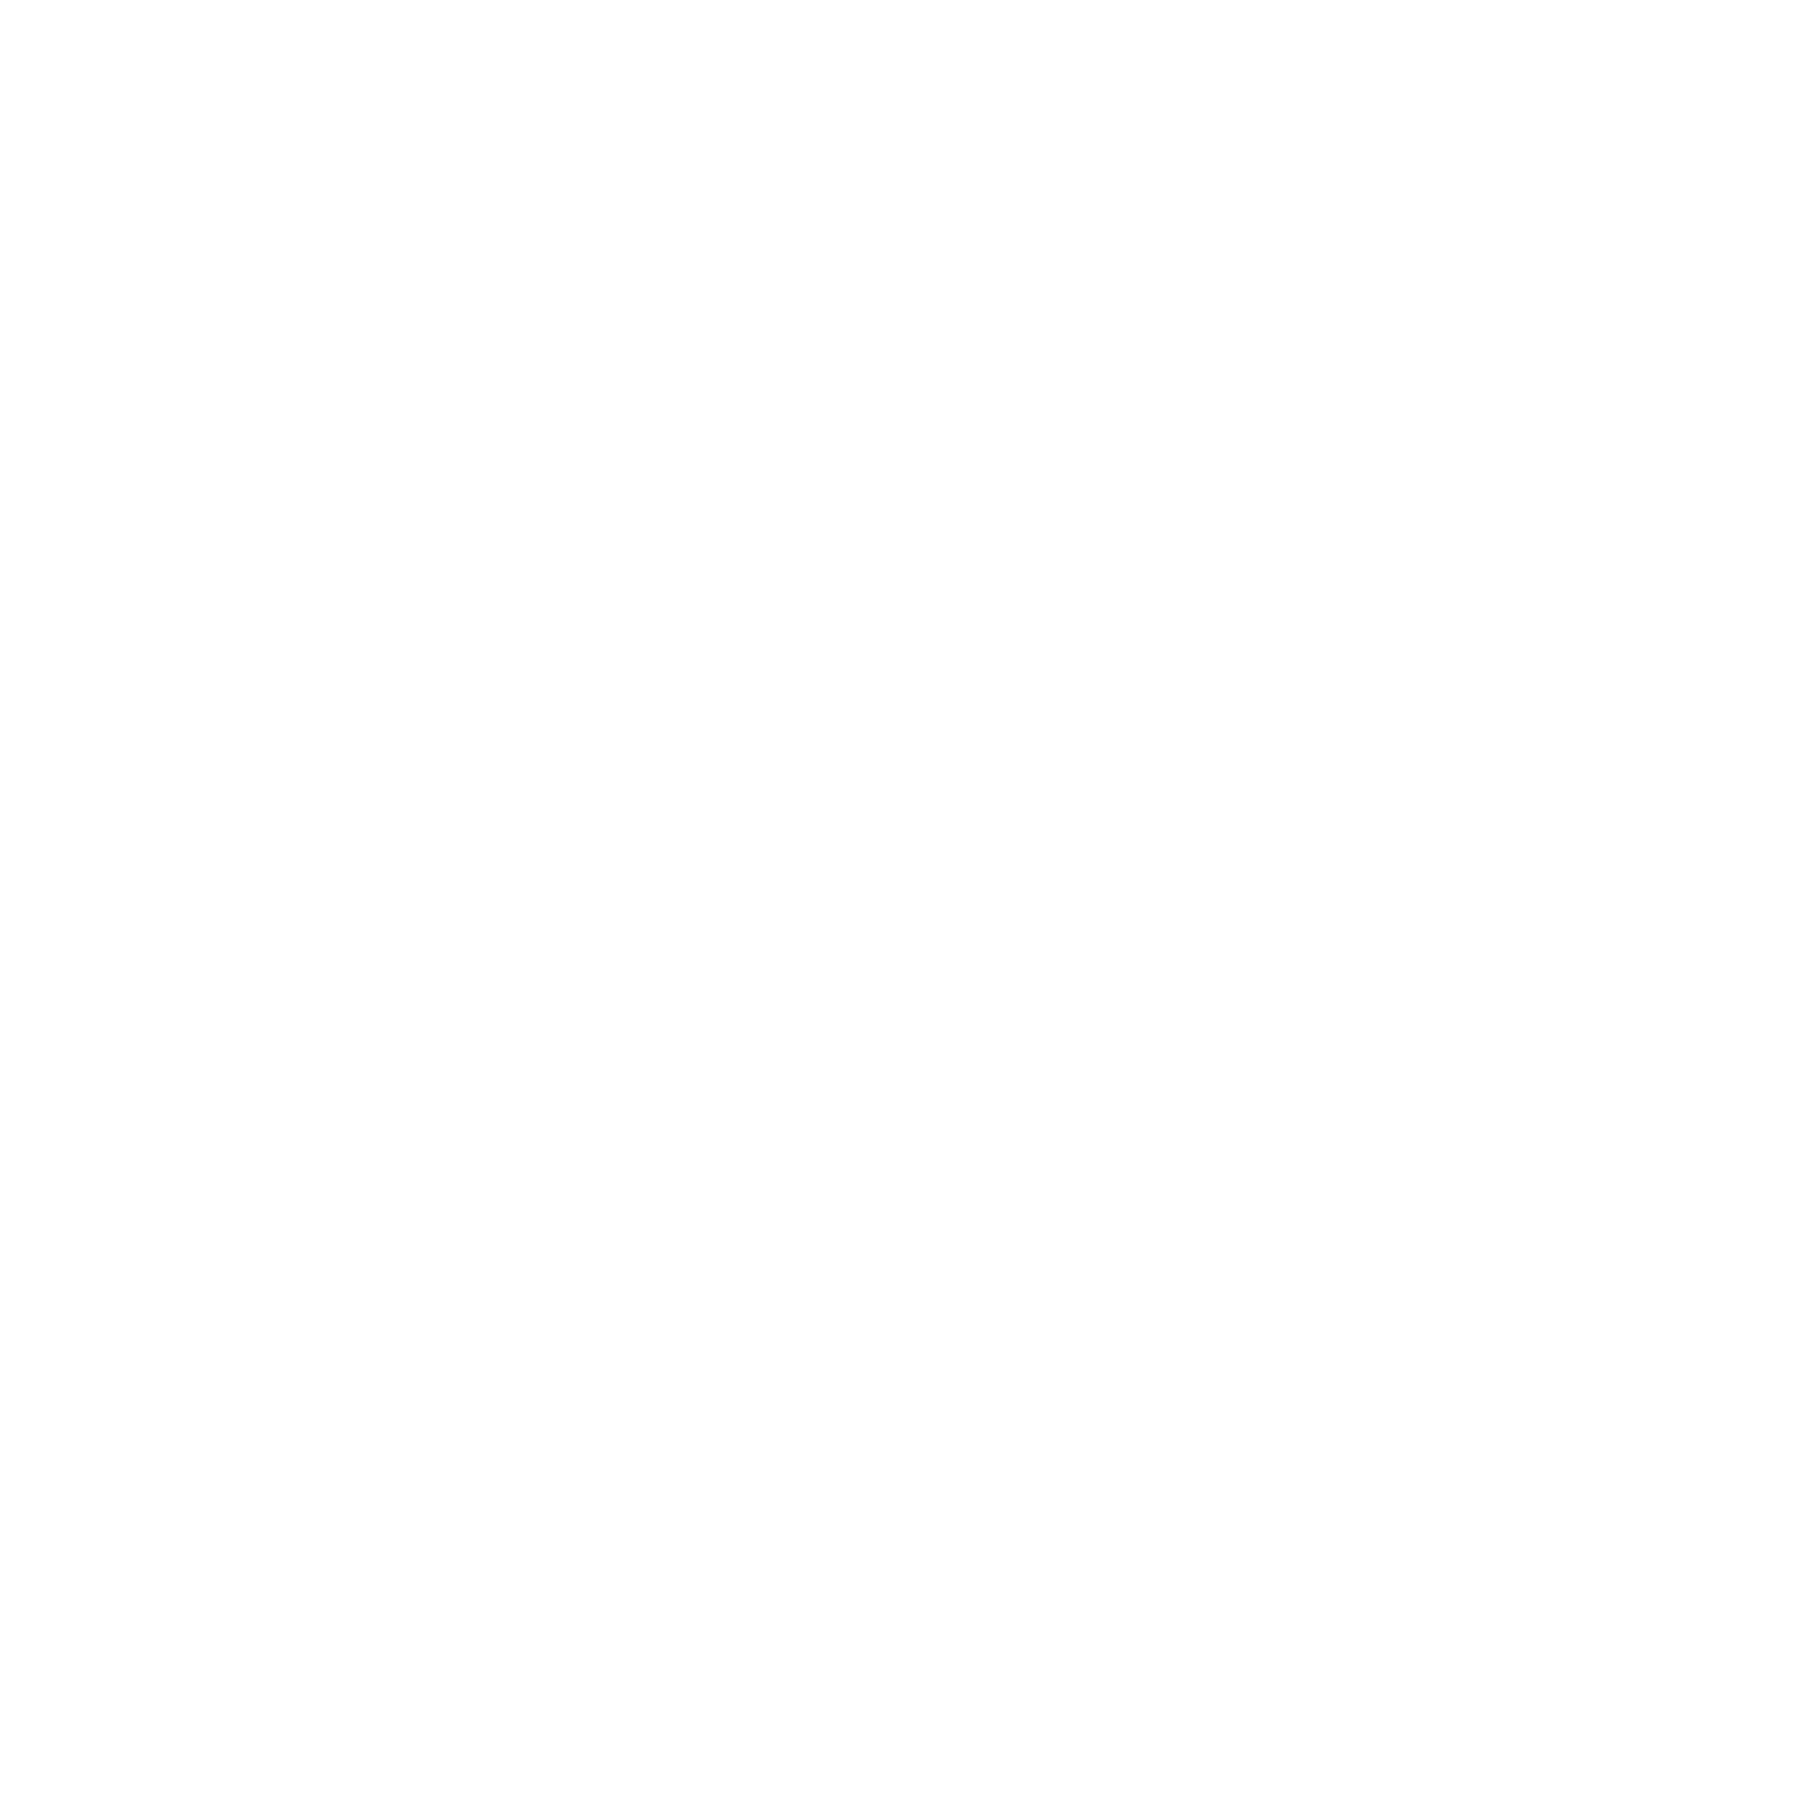 A link to the Ascension Parish Map Gallery